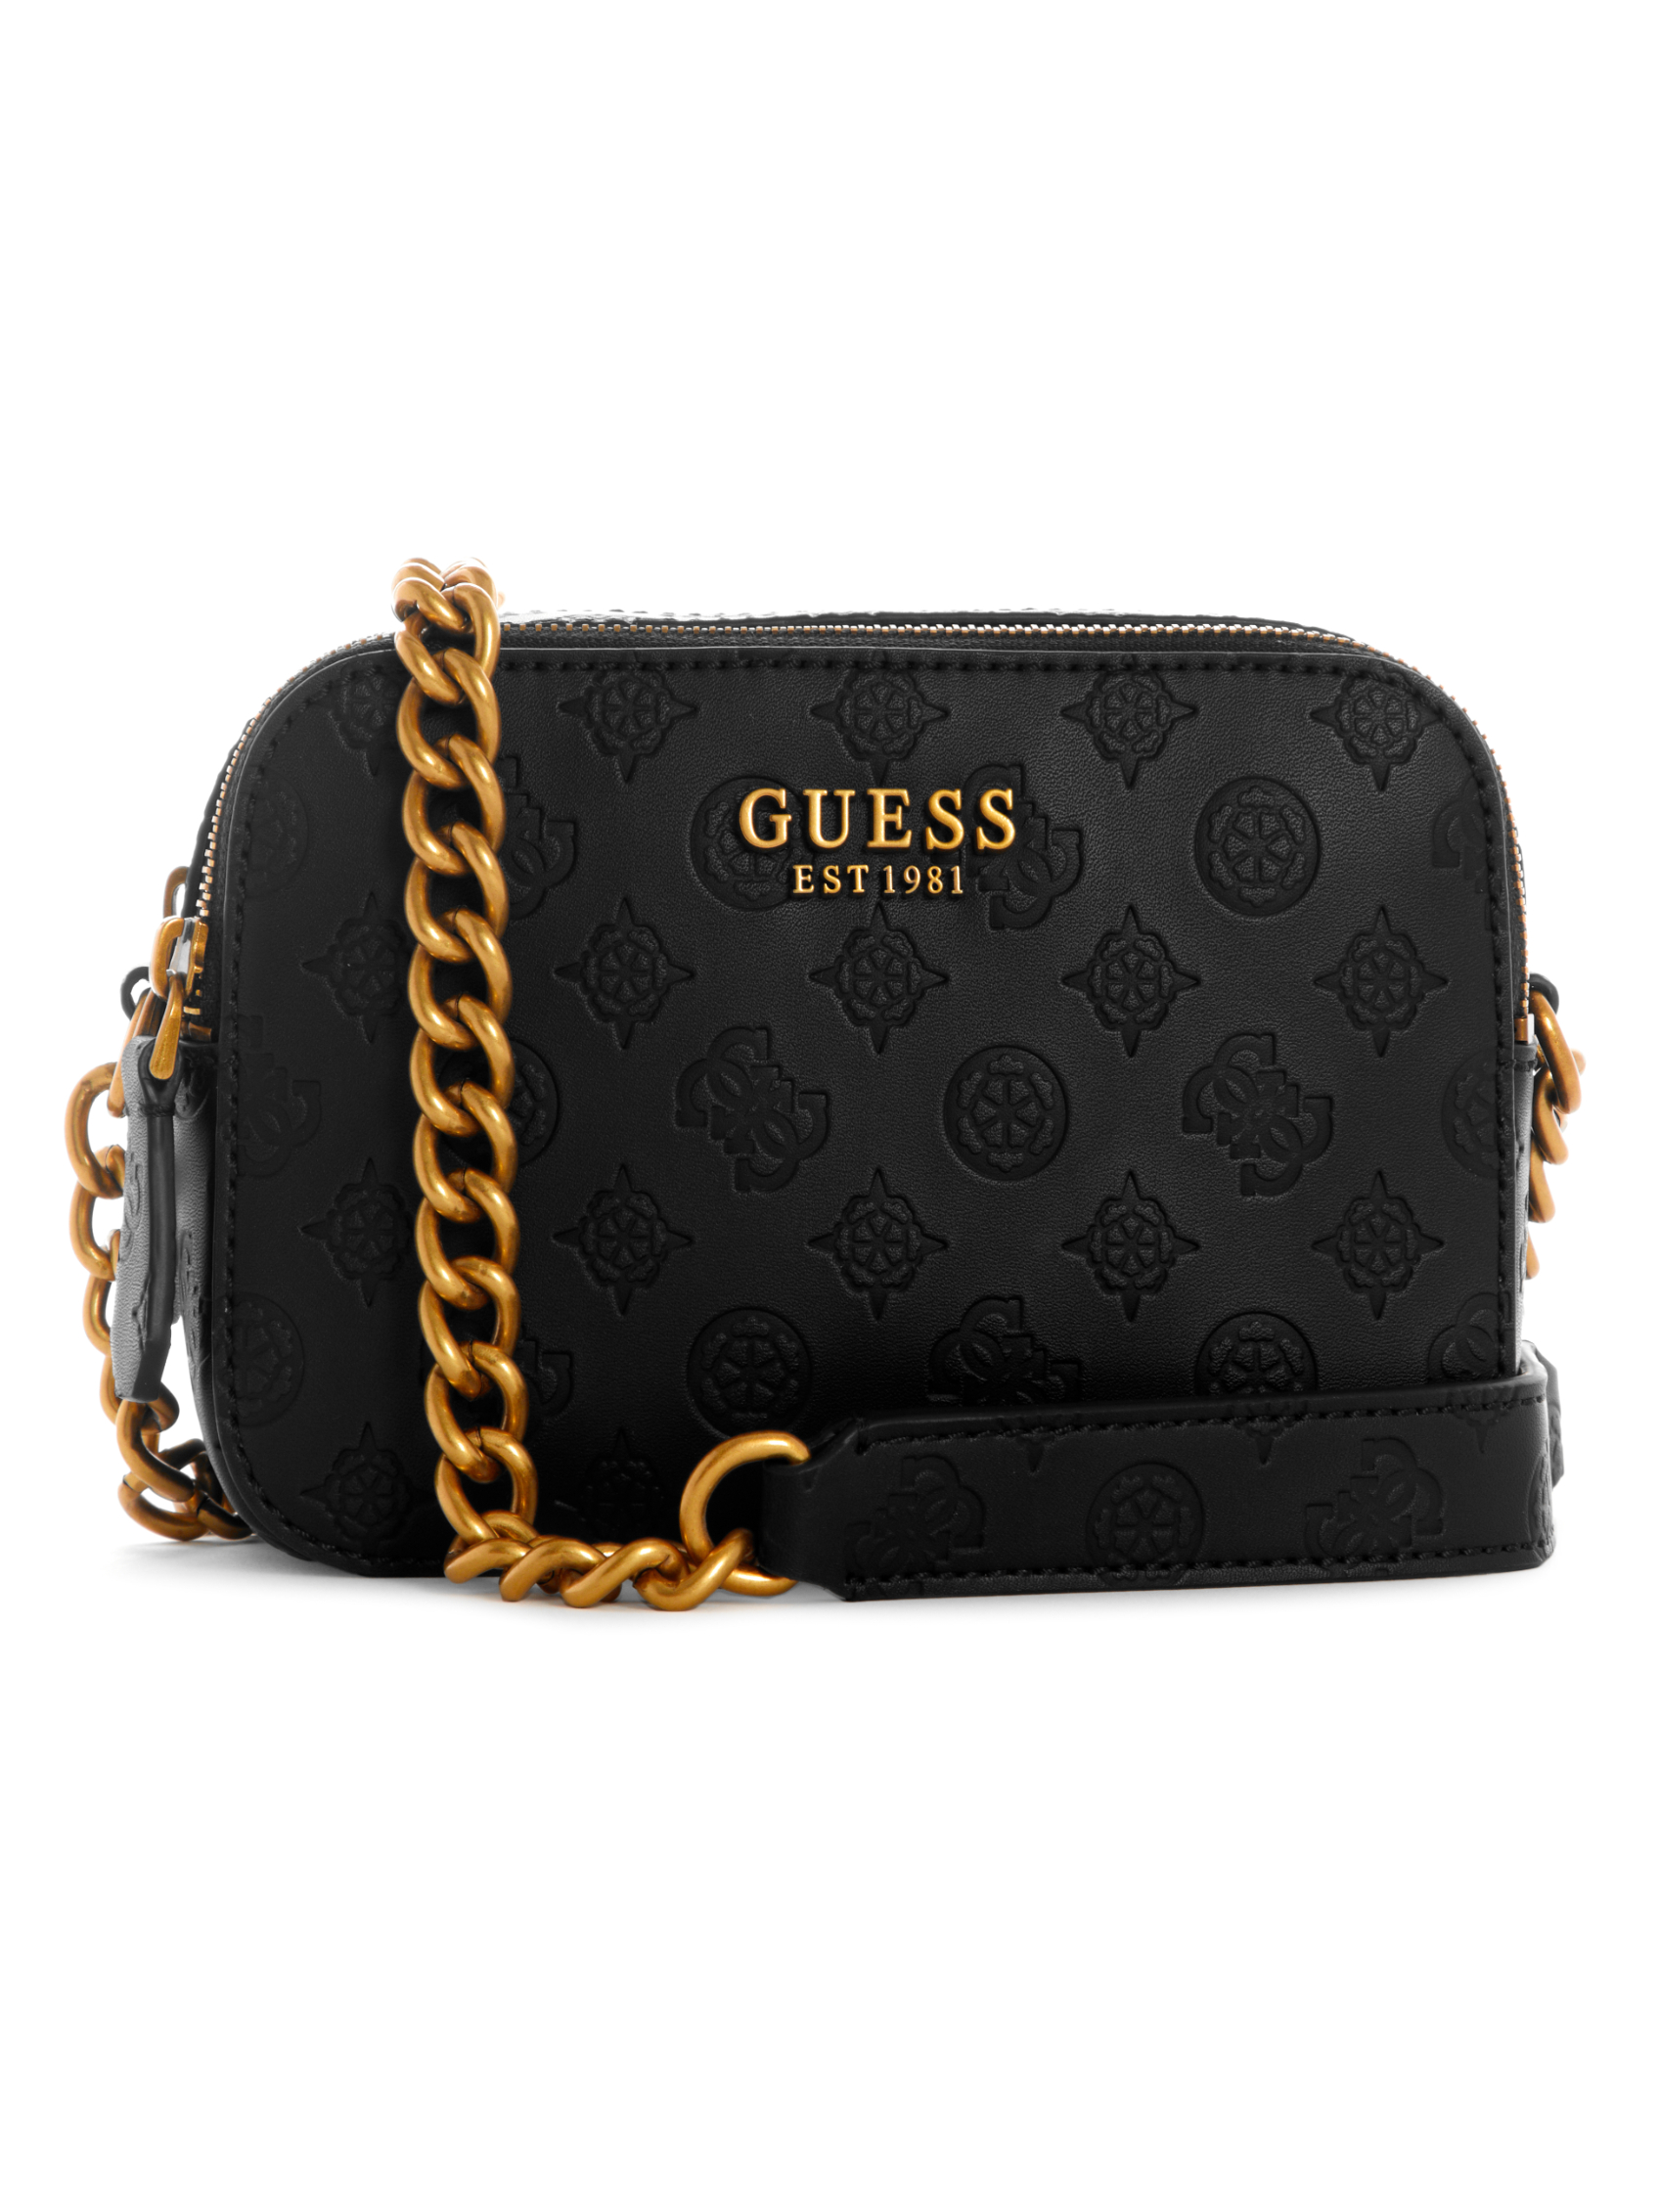 NOELLE CROSSBODY CAMERA | Guess Philippines